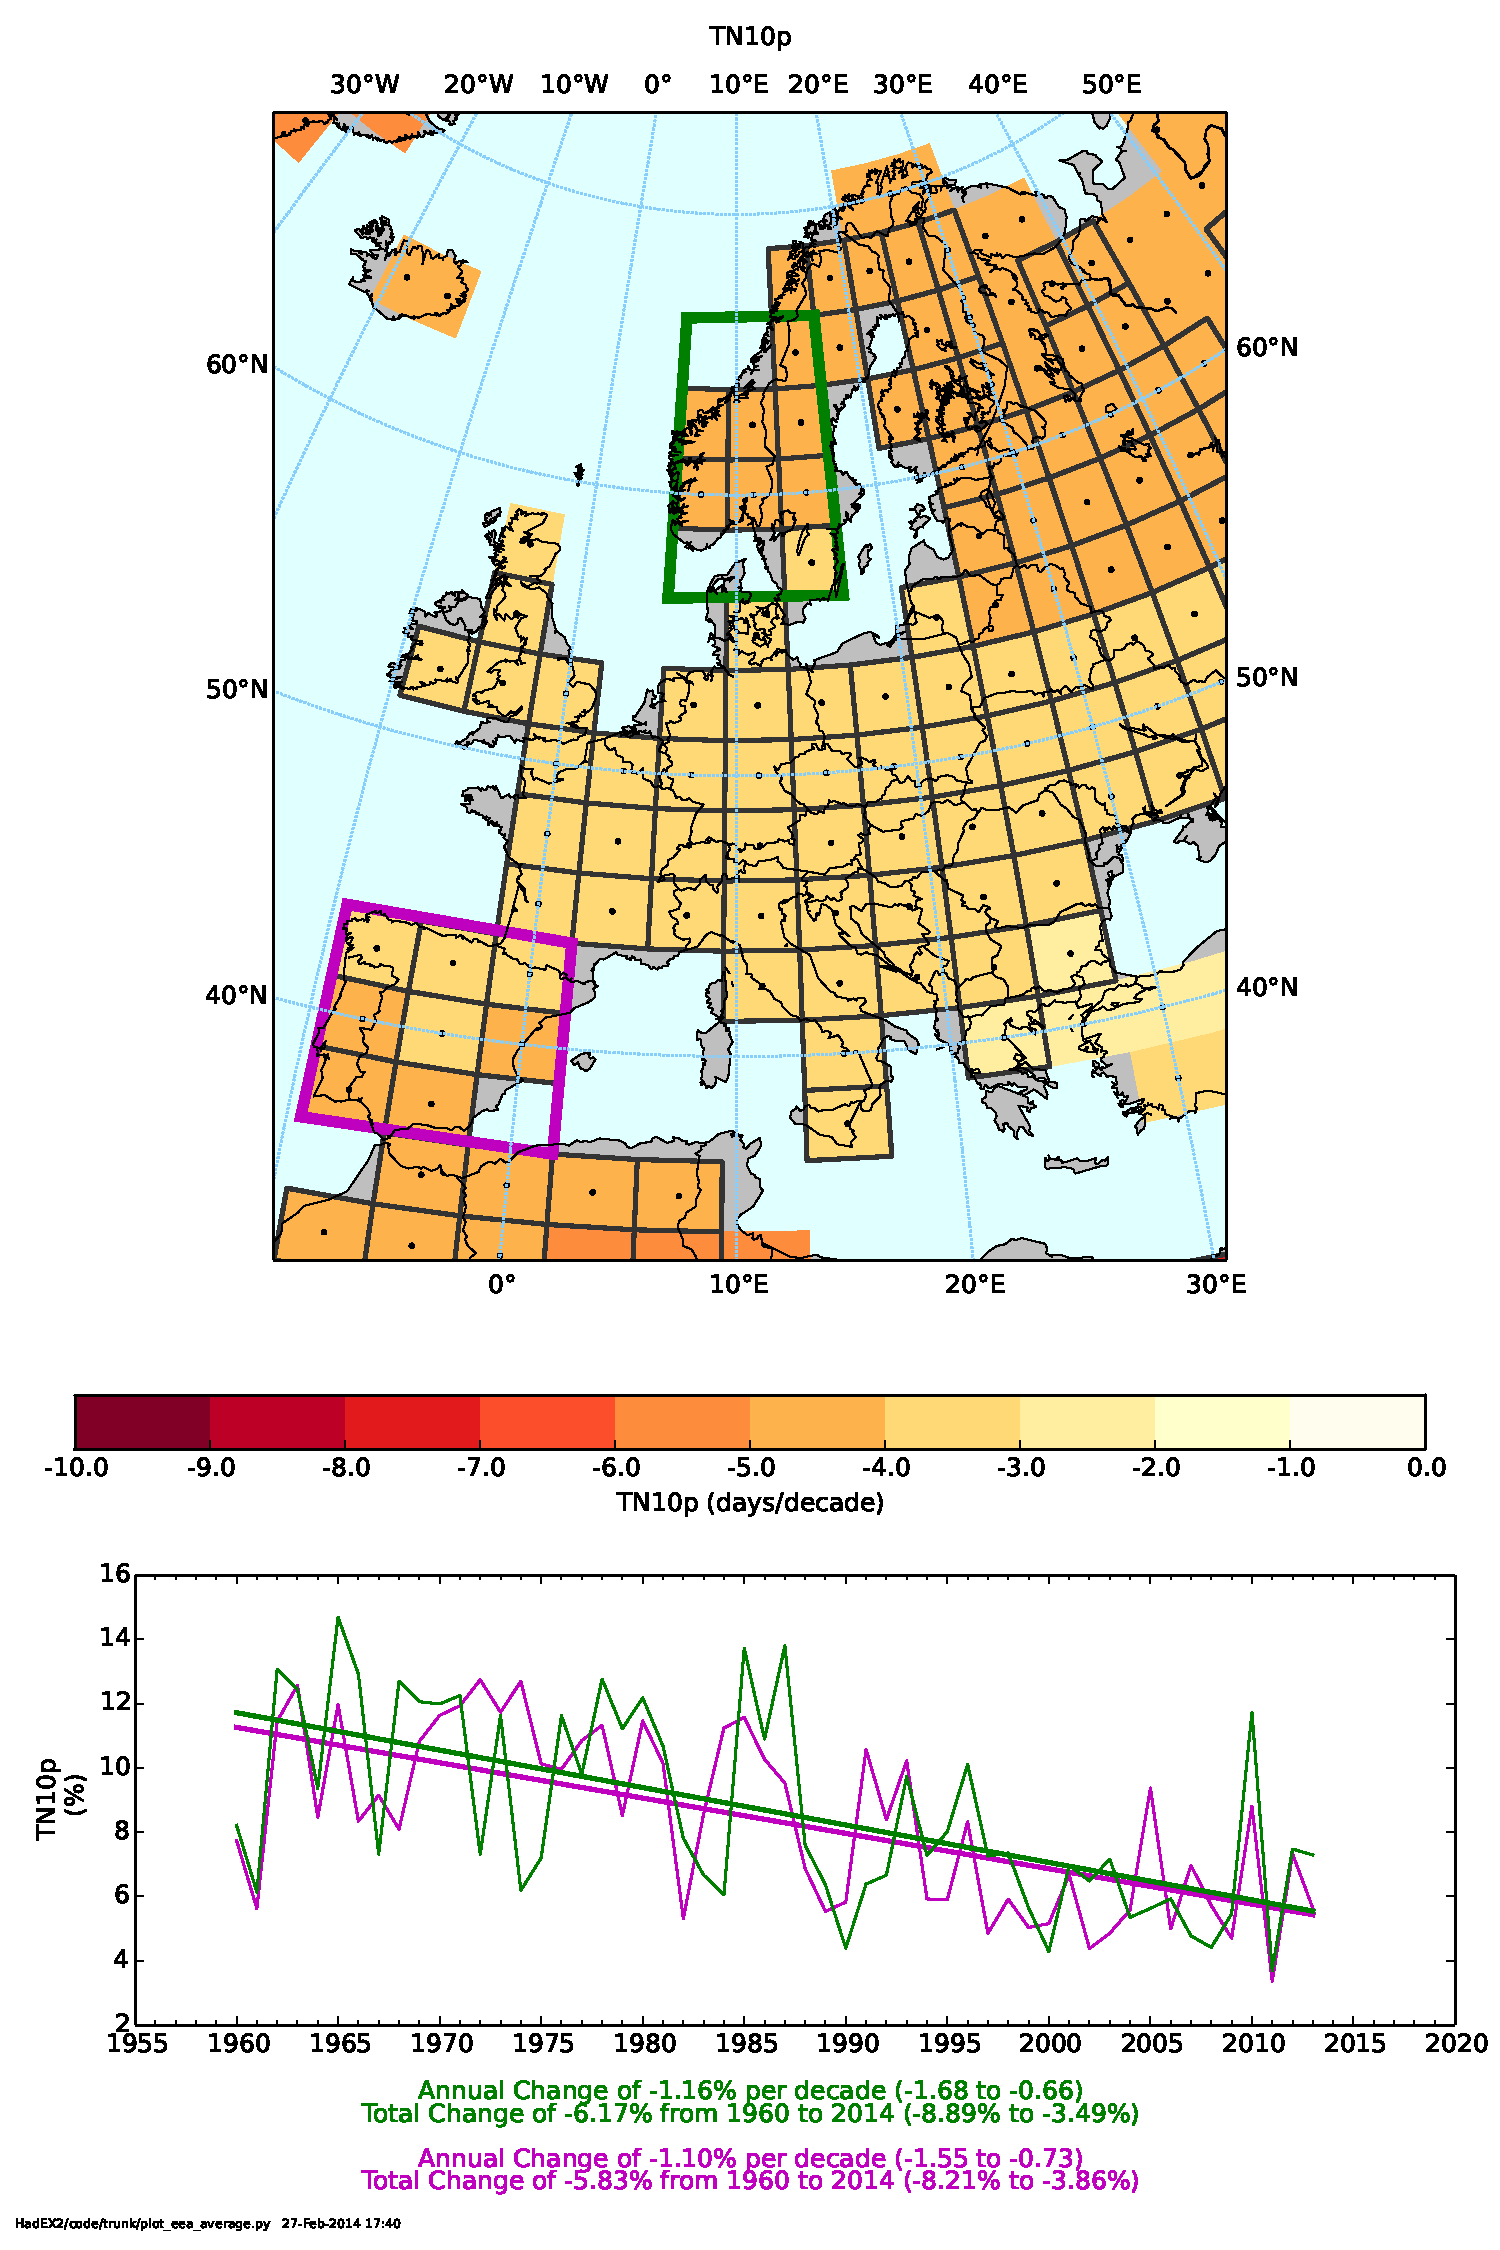 Trends in cool nights across Europe